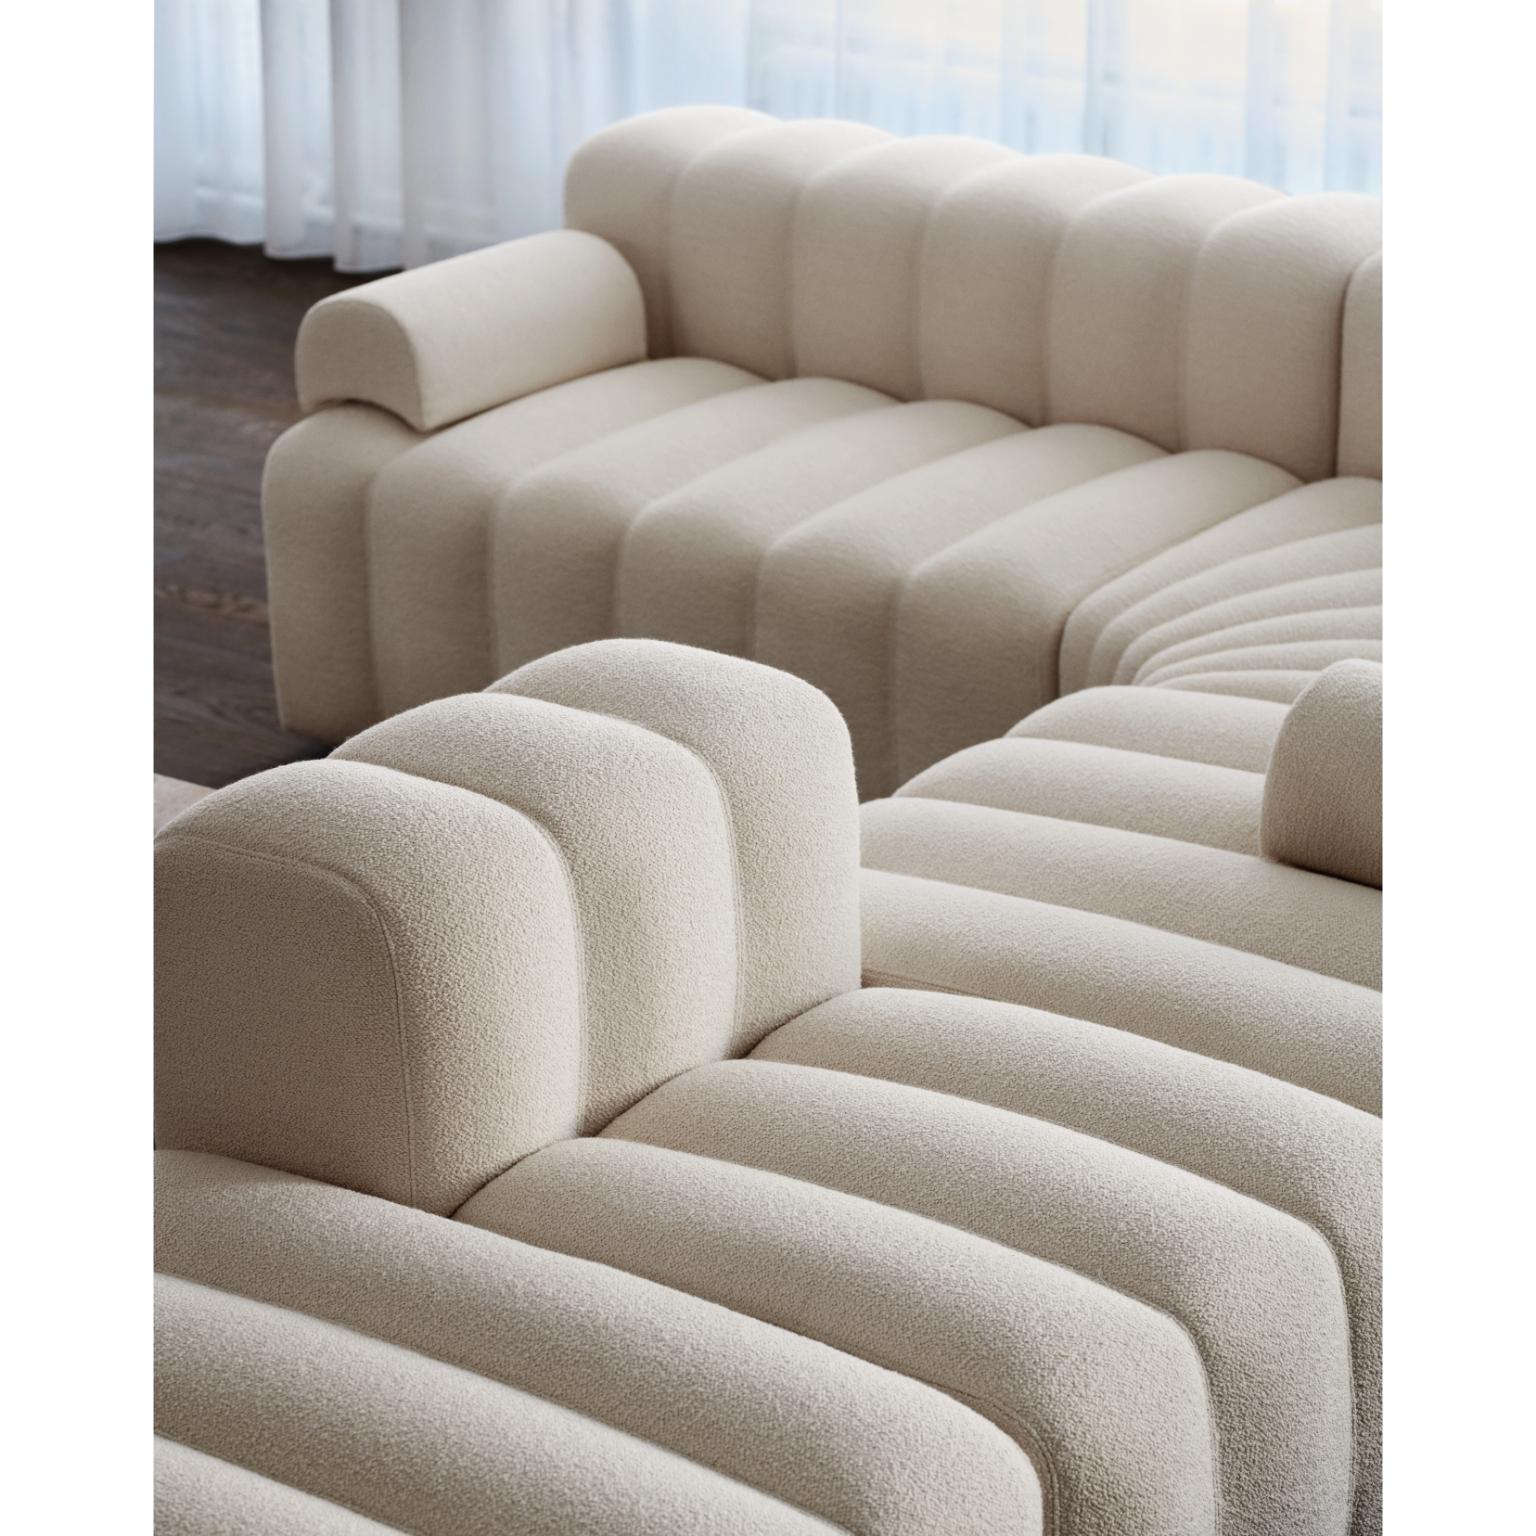 Studio Lounge Ottoman Sofa by NORR11
Dimensions: D 80 x W 120 x H 47 cm. SH 47 cm. 
Materials: Foam, wood and upholstery.
Upholstery: Barnum Boucle Color 3.

Available in different upholstery options. A plywood structure with elastic belts & foam.